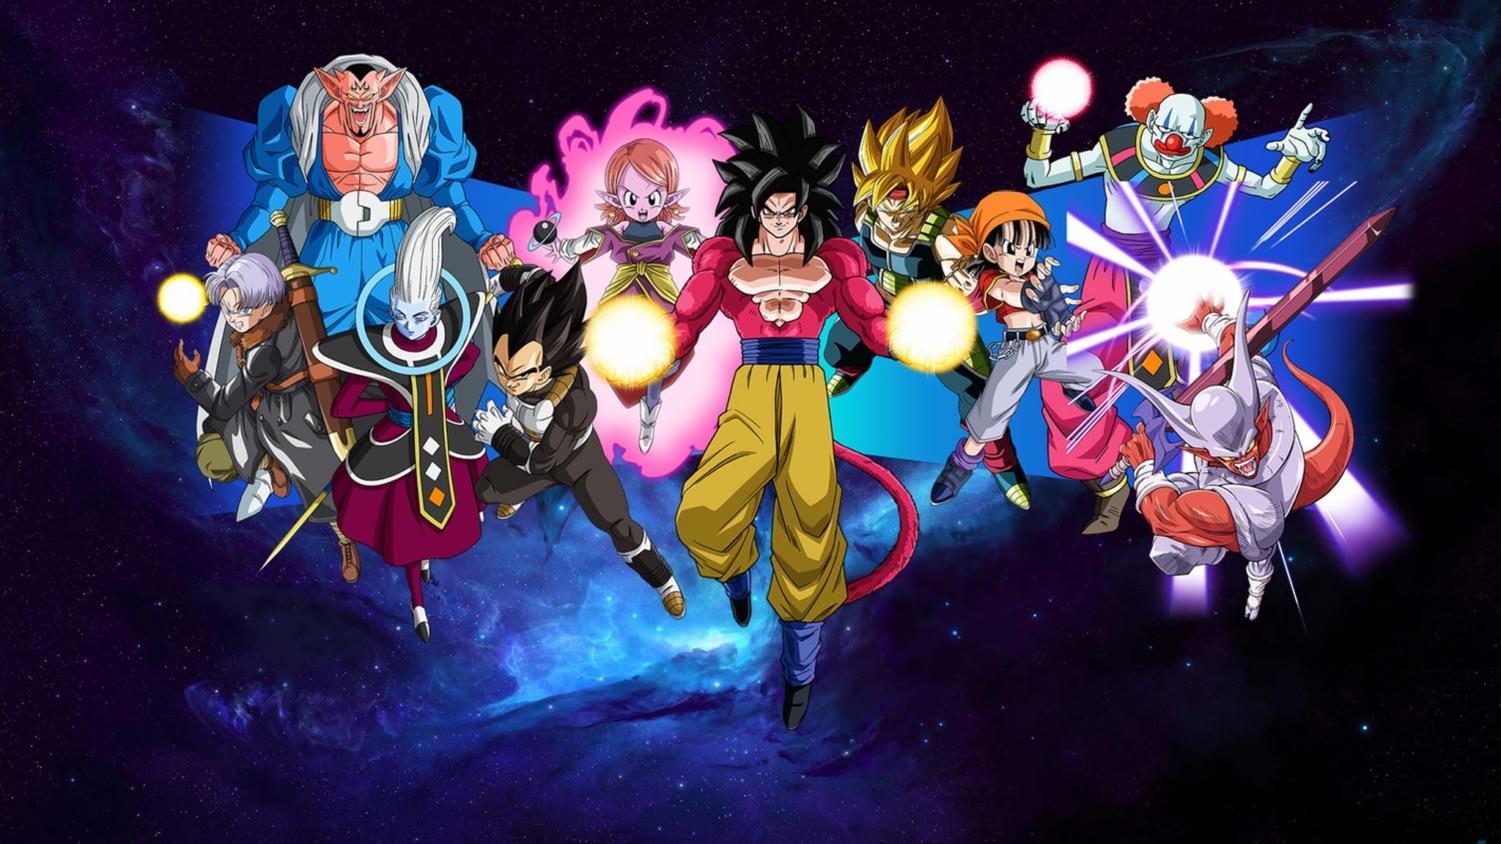 Dragon Ball Super: Super Hero' powers up familiar heroes - East Los Angeles  College Campus News